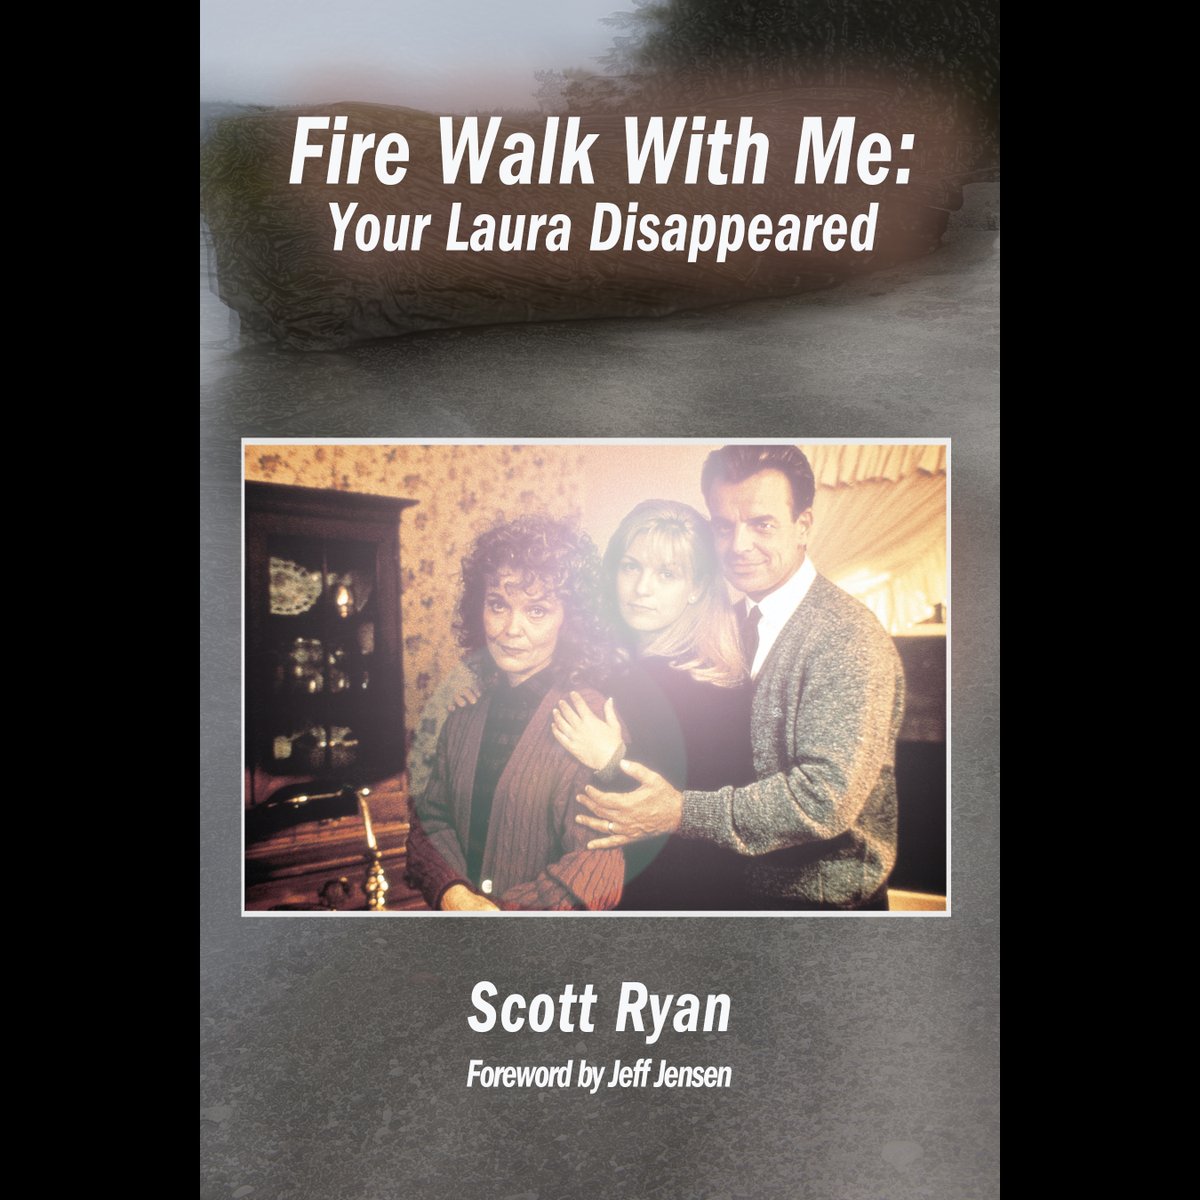 I hate to promote Amazon, but they are running a sale on my Fire Walk With Me book and its only $14. I can't beat that price, so might as well get it while you can. amzn.to/44otKw8